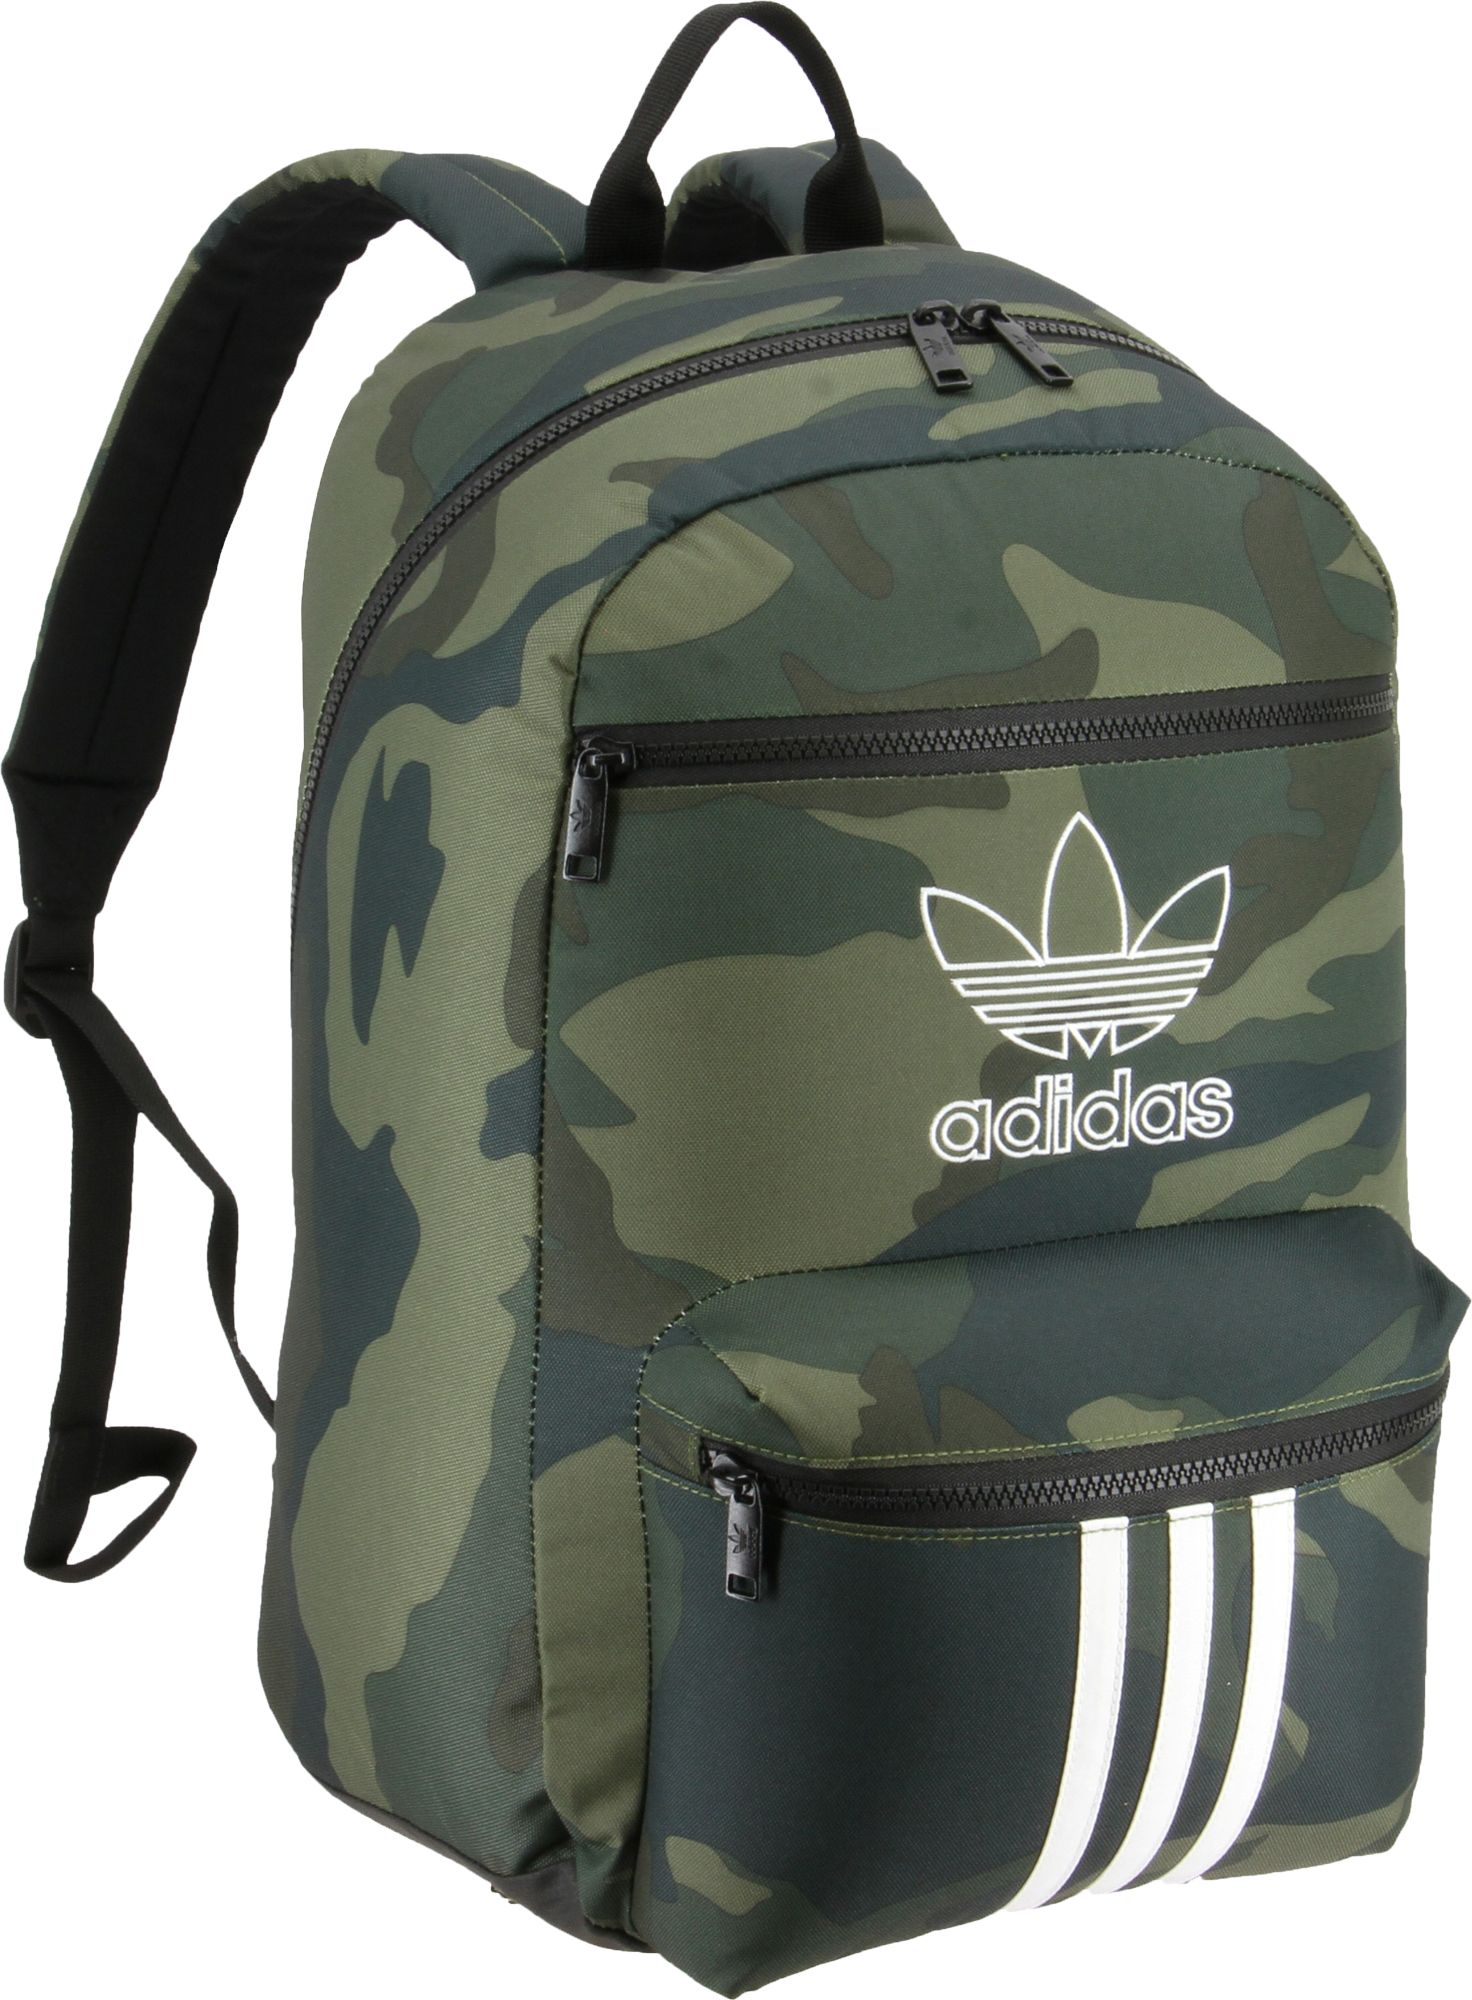 adidas 3 stripes backpack review